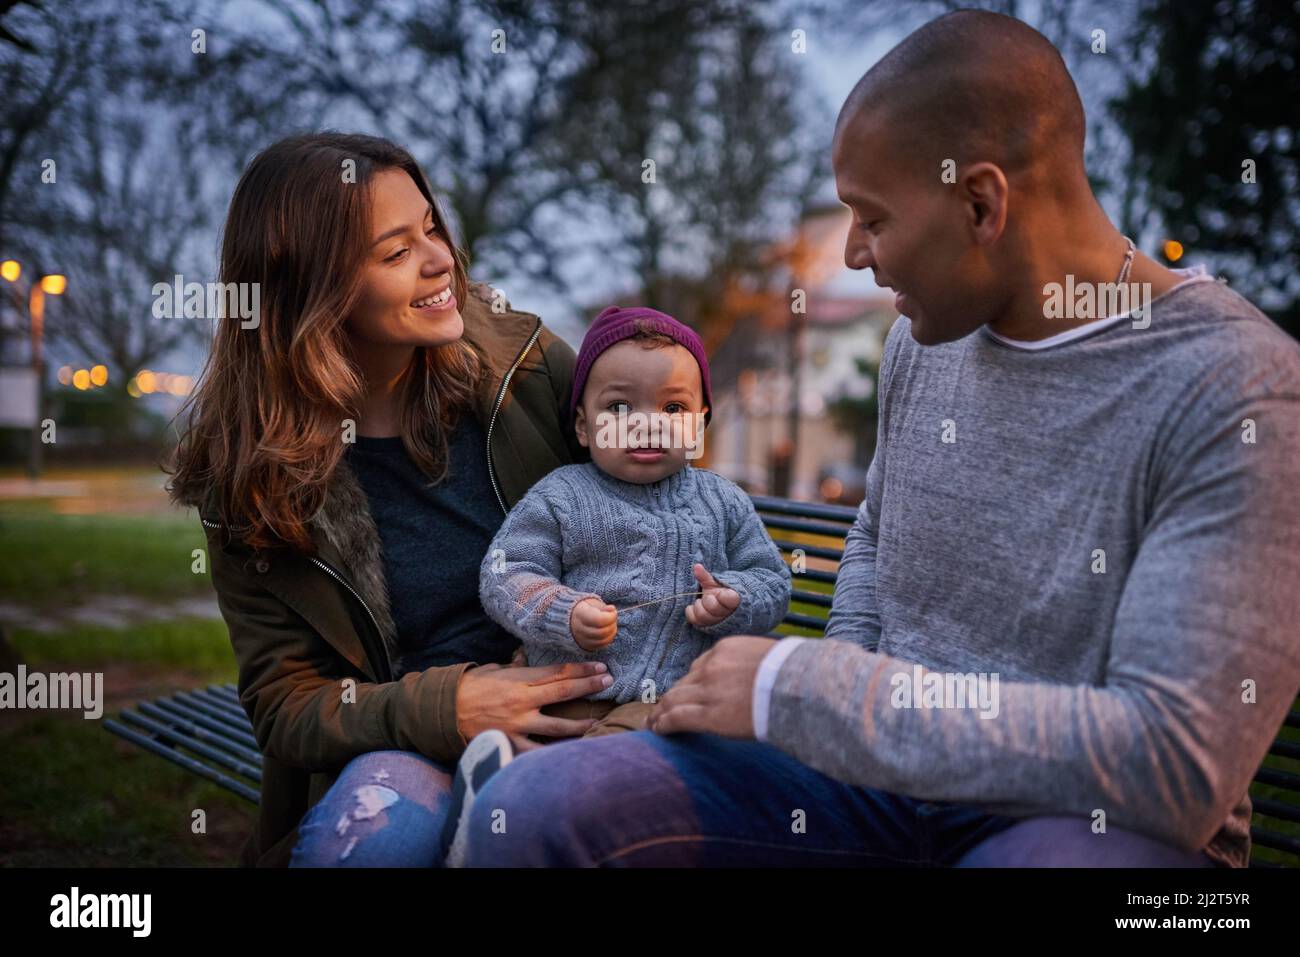 We brought our cutie to explore the park today. Shot of a mother and a father bonding with their little son outdoors. Stock Photo